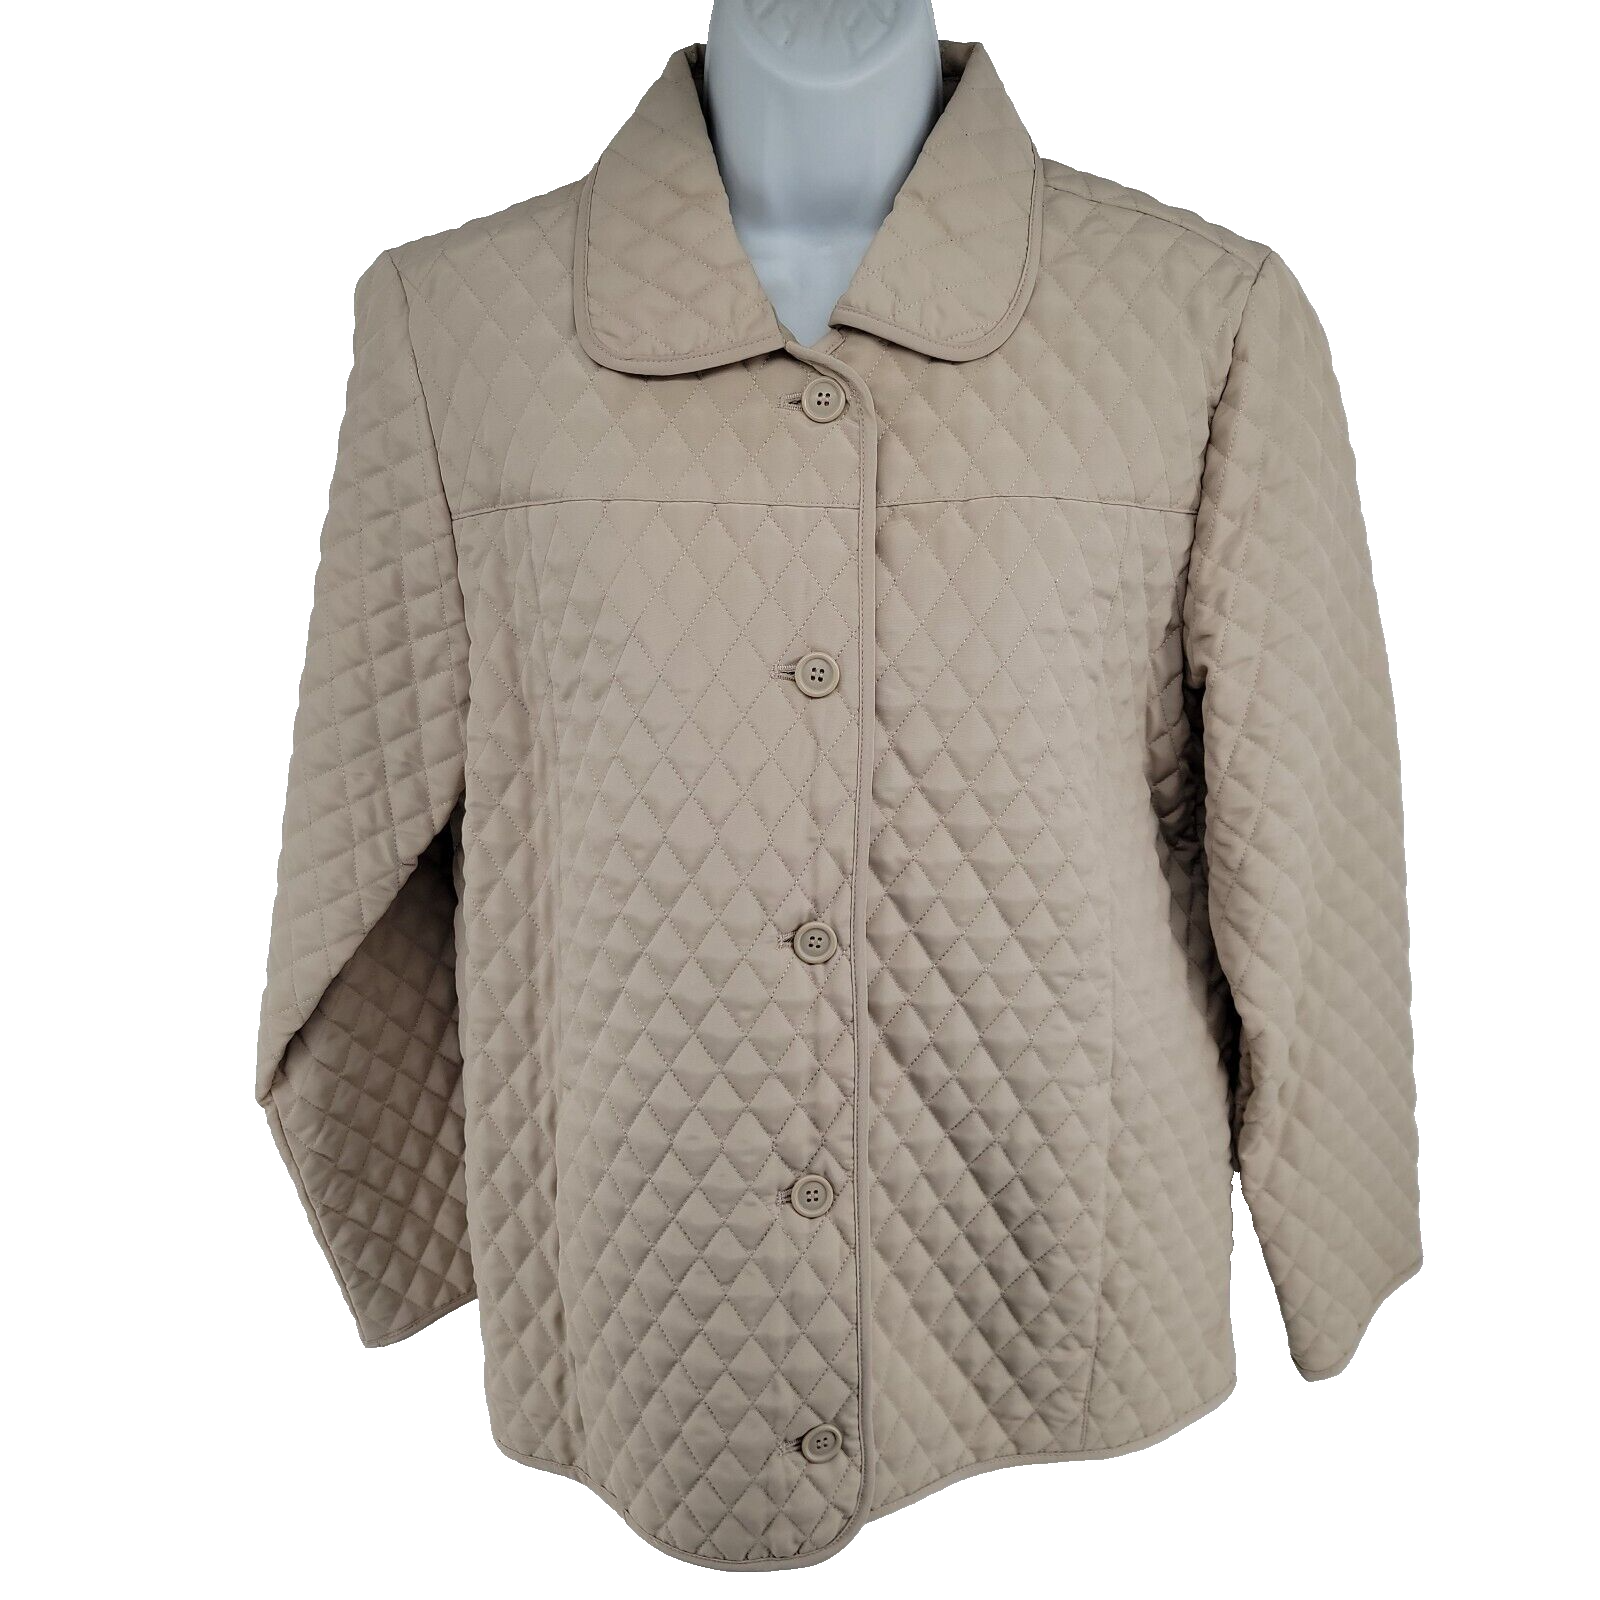 Primary image for Nordic Lights Quilted Jacket Women's Size M Beige Sand